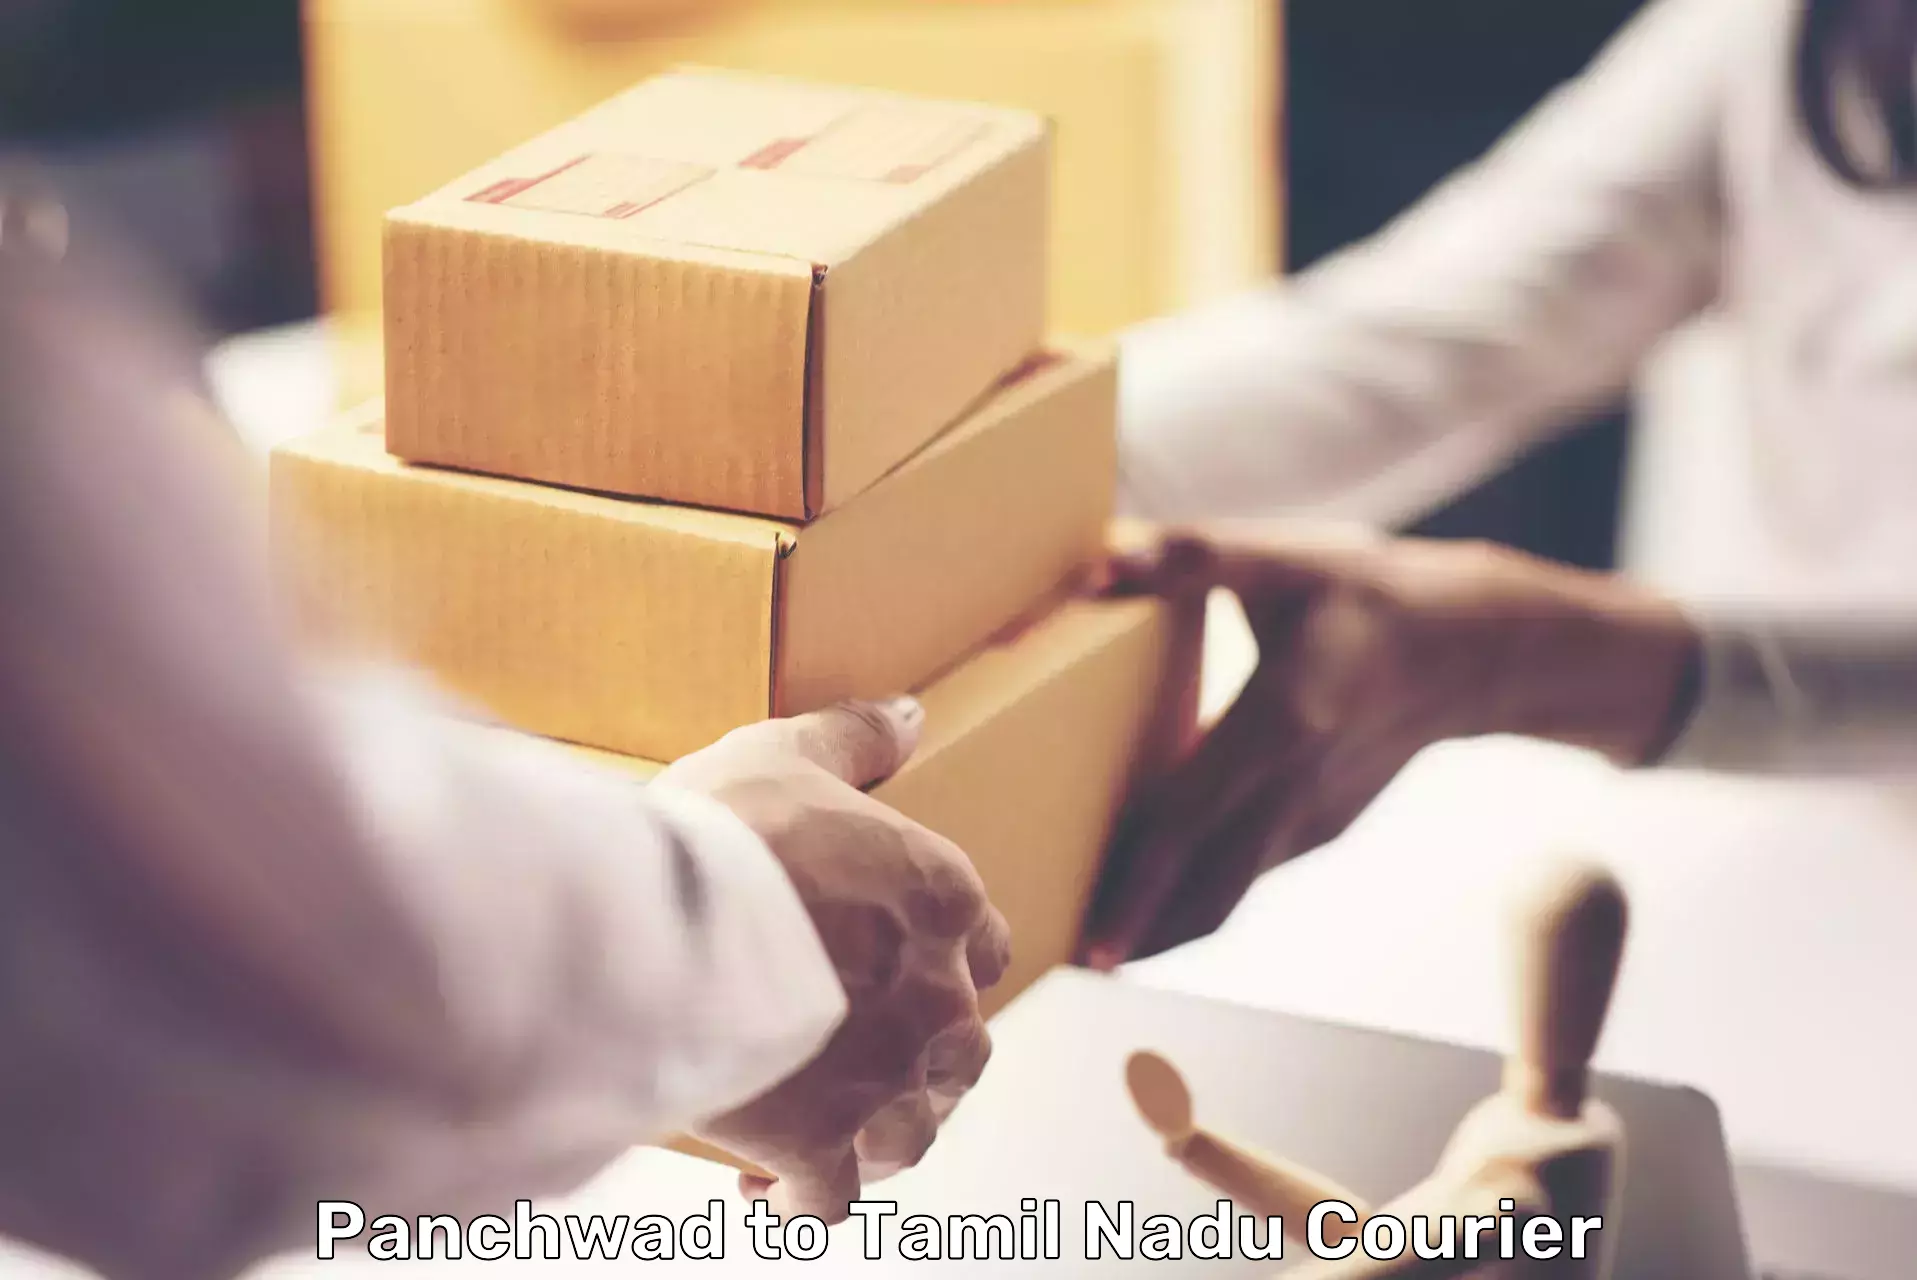 Flexible shipping options Panchwad to Cuddalore